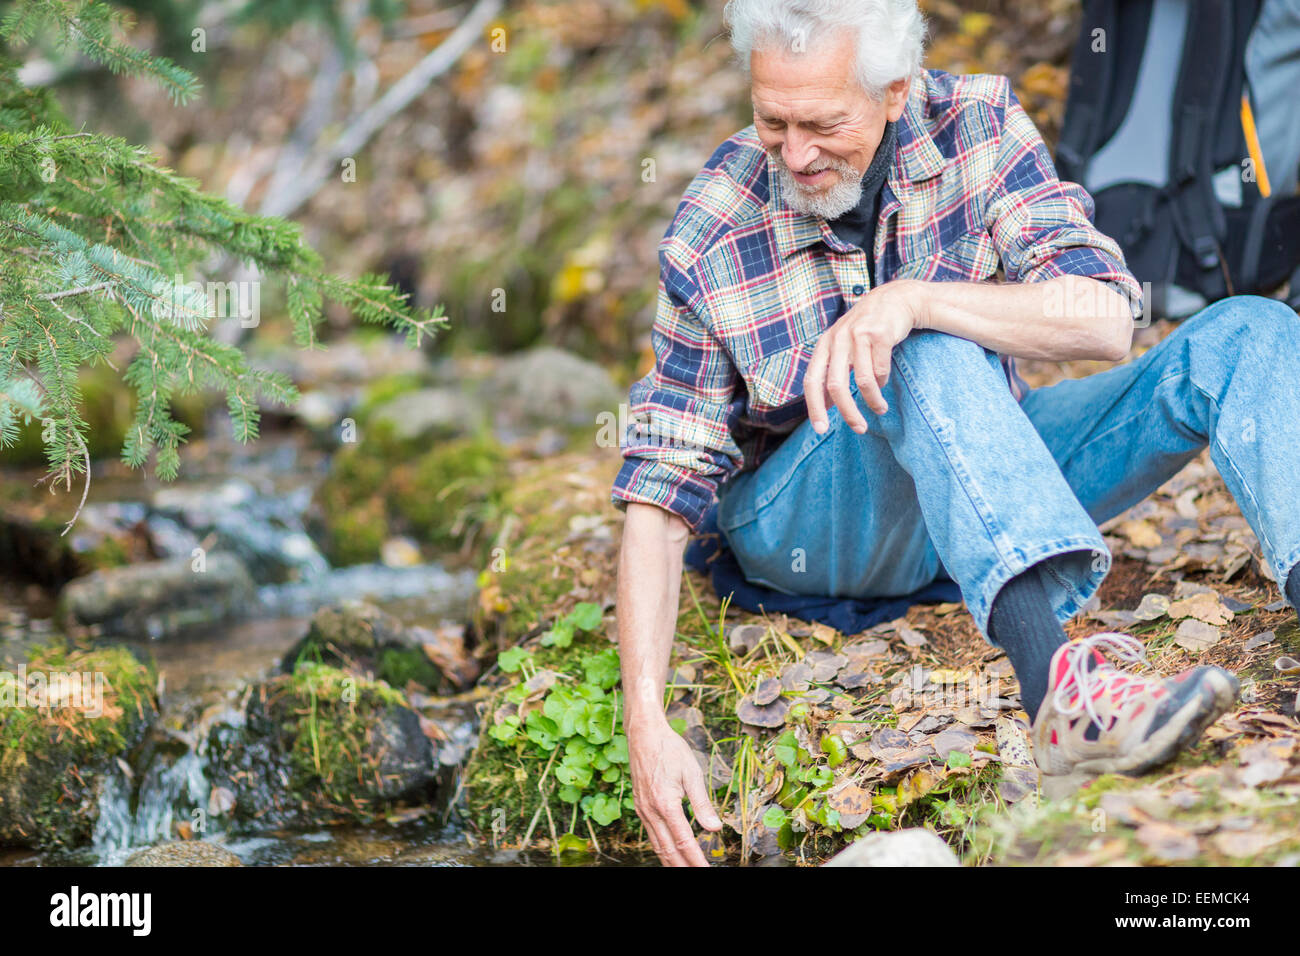 Caucasian hiker dipping fingers in forest creek Stock Photo